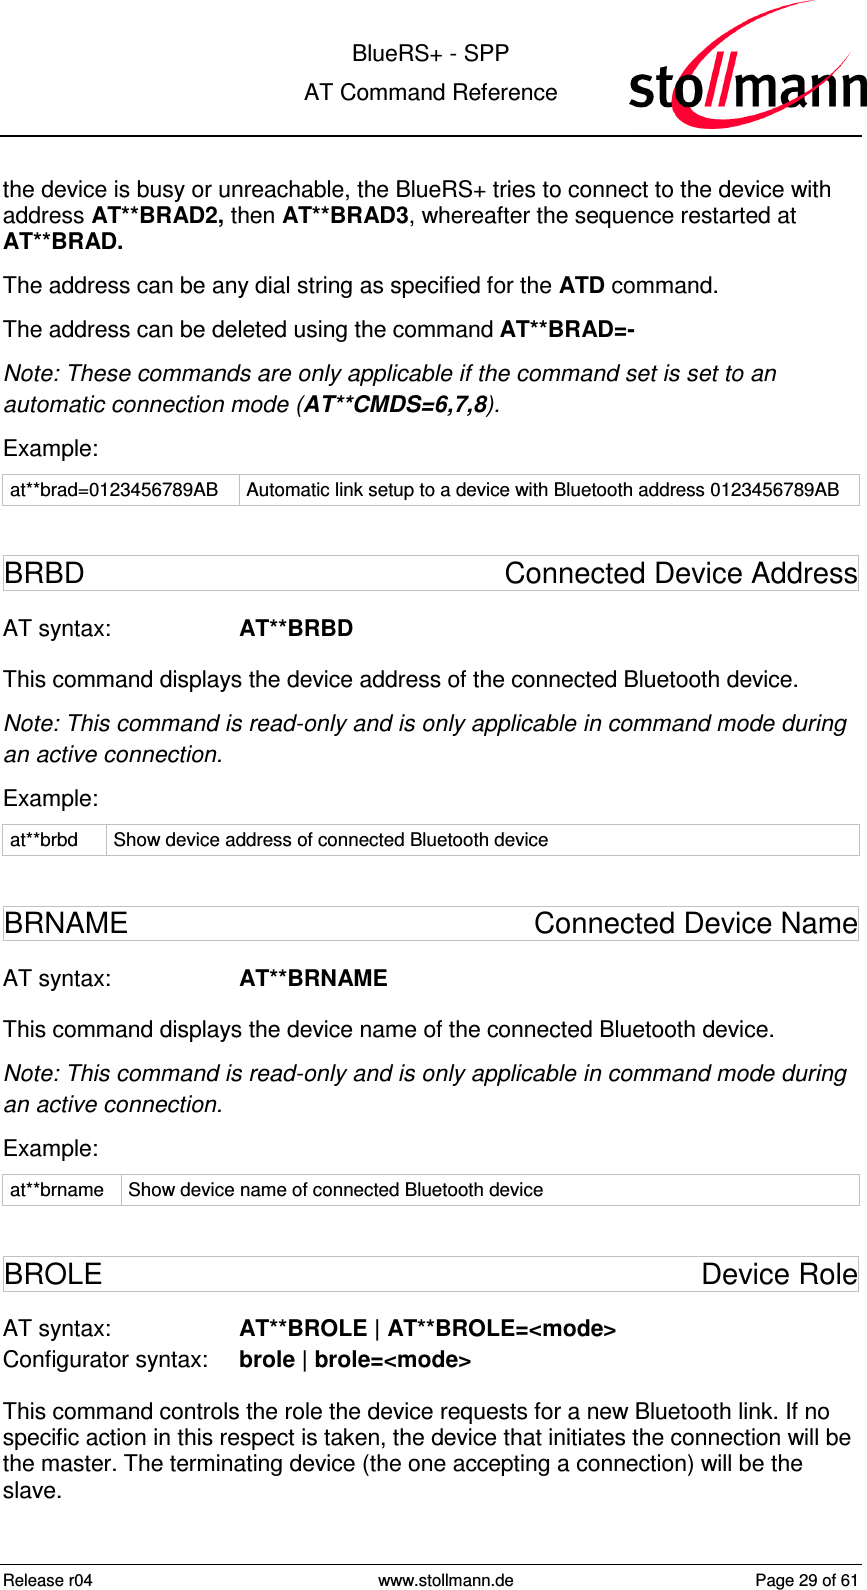  BlueRS+ - SPP AT Command Reference Release r04  www.stollmann.de  Page 29 of 61  the device is busy or unreachable, the BlueRS+ tries to connect to the device with address AT**BRAD2, then AT**BRAD3, whereafter the sequence restarted at AT**BRAD. The address can be any dial string as specified for the ATD command. The address can be deleted using the command AT**BRAD=- Note: These commands are only applicable if the command set is set to an automatic connection mode (AT**CMDS=6,7,8). Example: at**brad=0123456789AB  Automatic link setup to a device with Bluetooth address 0123456789AB BRBD  Connected Device Address AT syntax:  AT**BRBD This command displays the device address of the connected Bluetooth device. Note: This command is read-only and is only applicable in command mode during an active connection. Example: at**brbd  Show device address of connected Bluetooth device BRNAME  Connected Device Name AT syntax:  AT**BRNAME This command displays the device name of the connected Bluetooth device. Note: This command is read-only and is only applicable in command mode during an active connection. Example: at**brname  Show device name of connected Bluetooth device BROLE  Device Role AT syntax:  AT**BROLE | AT**BROLE=&lt;mode&gt; Configurator syntax:  brole | brole=&lt;mode&gt; This command controls the role the device requests for a new Bluetooth link. If no specific action in this respect is taken, the device that initiates the connection will be the master. The terminating device (the one accepting a connection) will be the slave.  